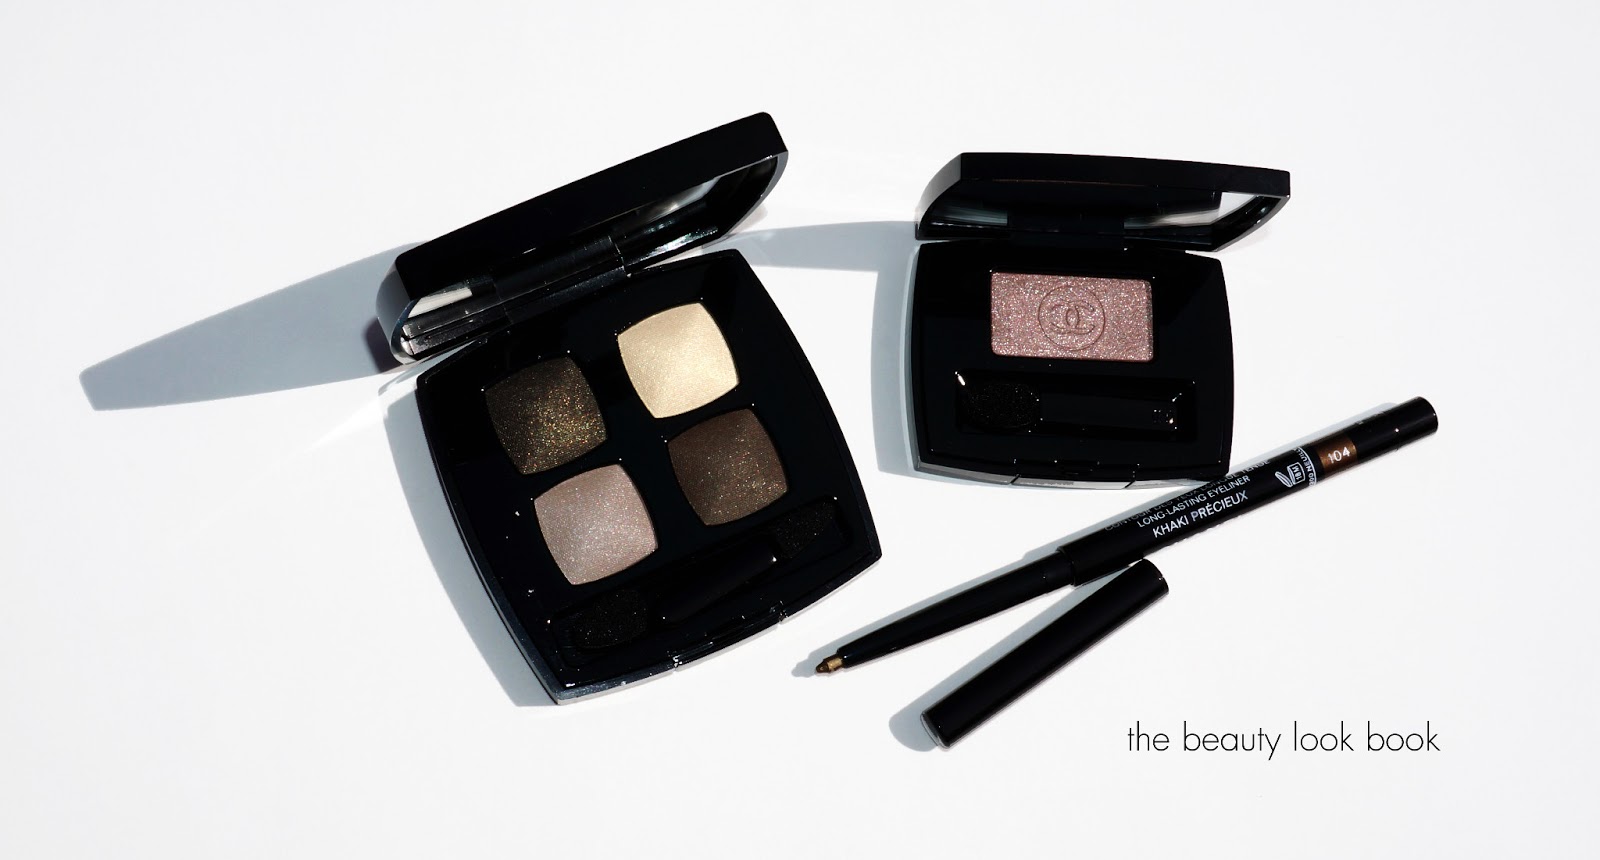 Chanel Les 4 Ombres eyeshadow quads and Joues Contraste blushes … USA vs  The Rest of the World – Sweet Makeup Temptations